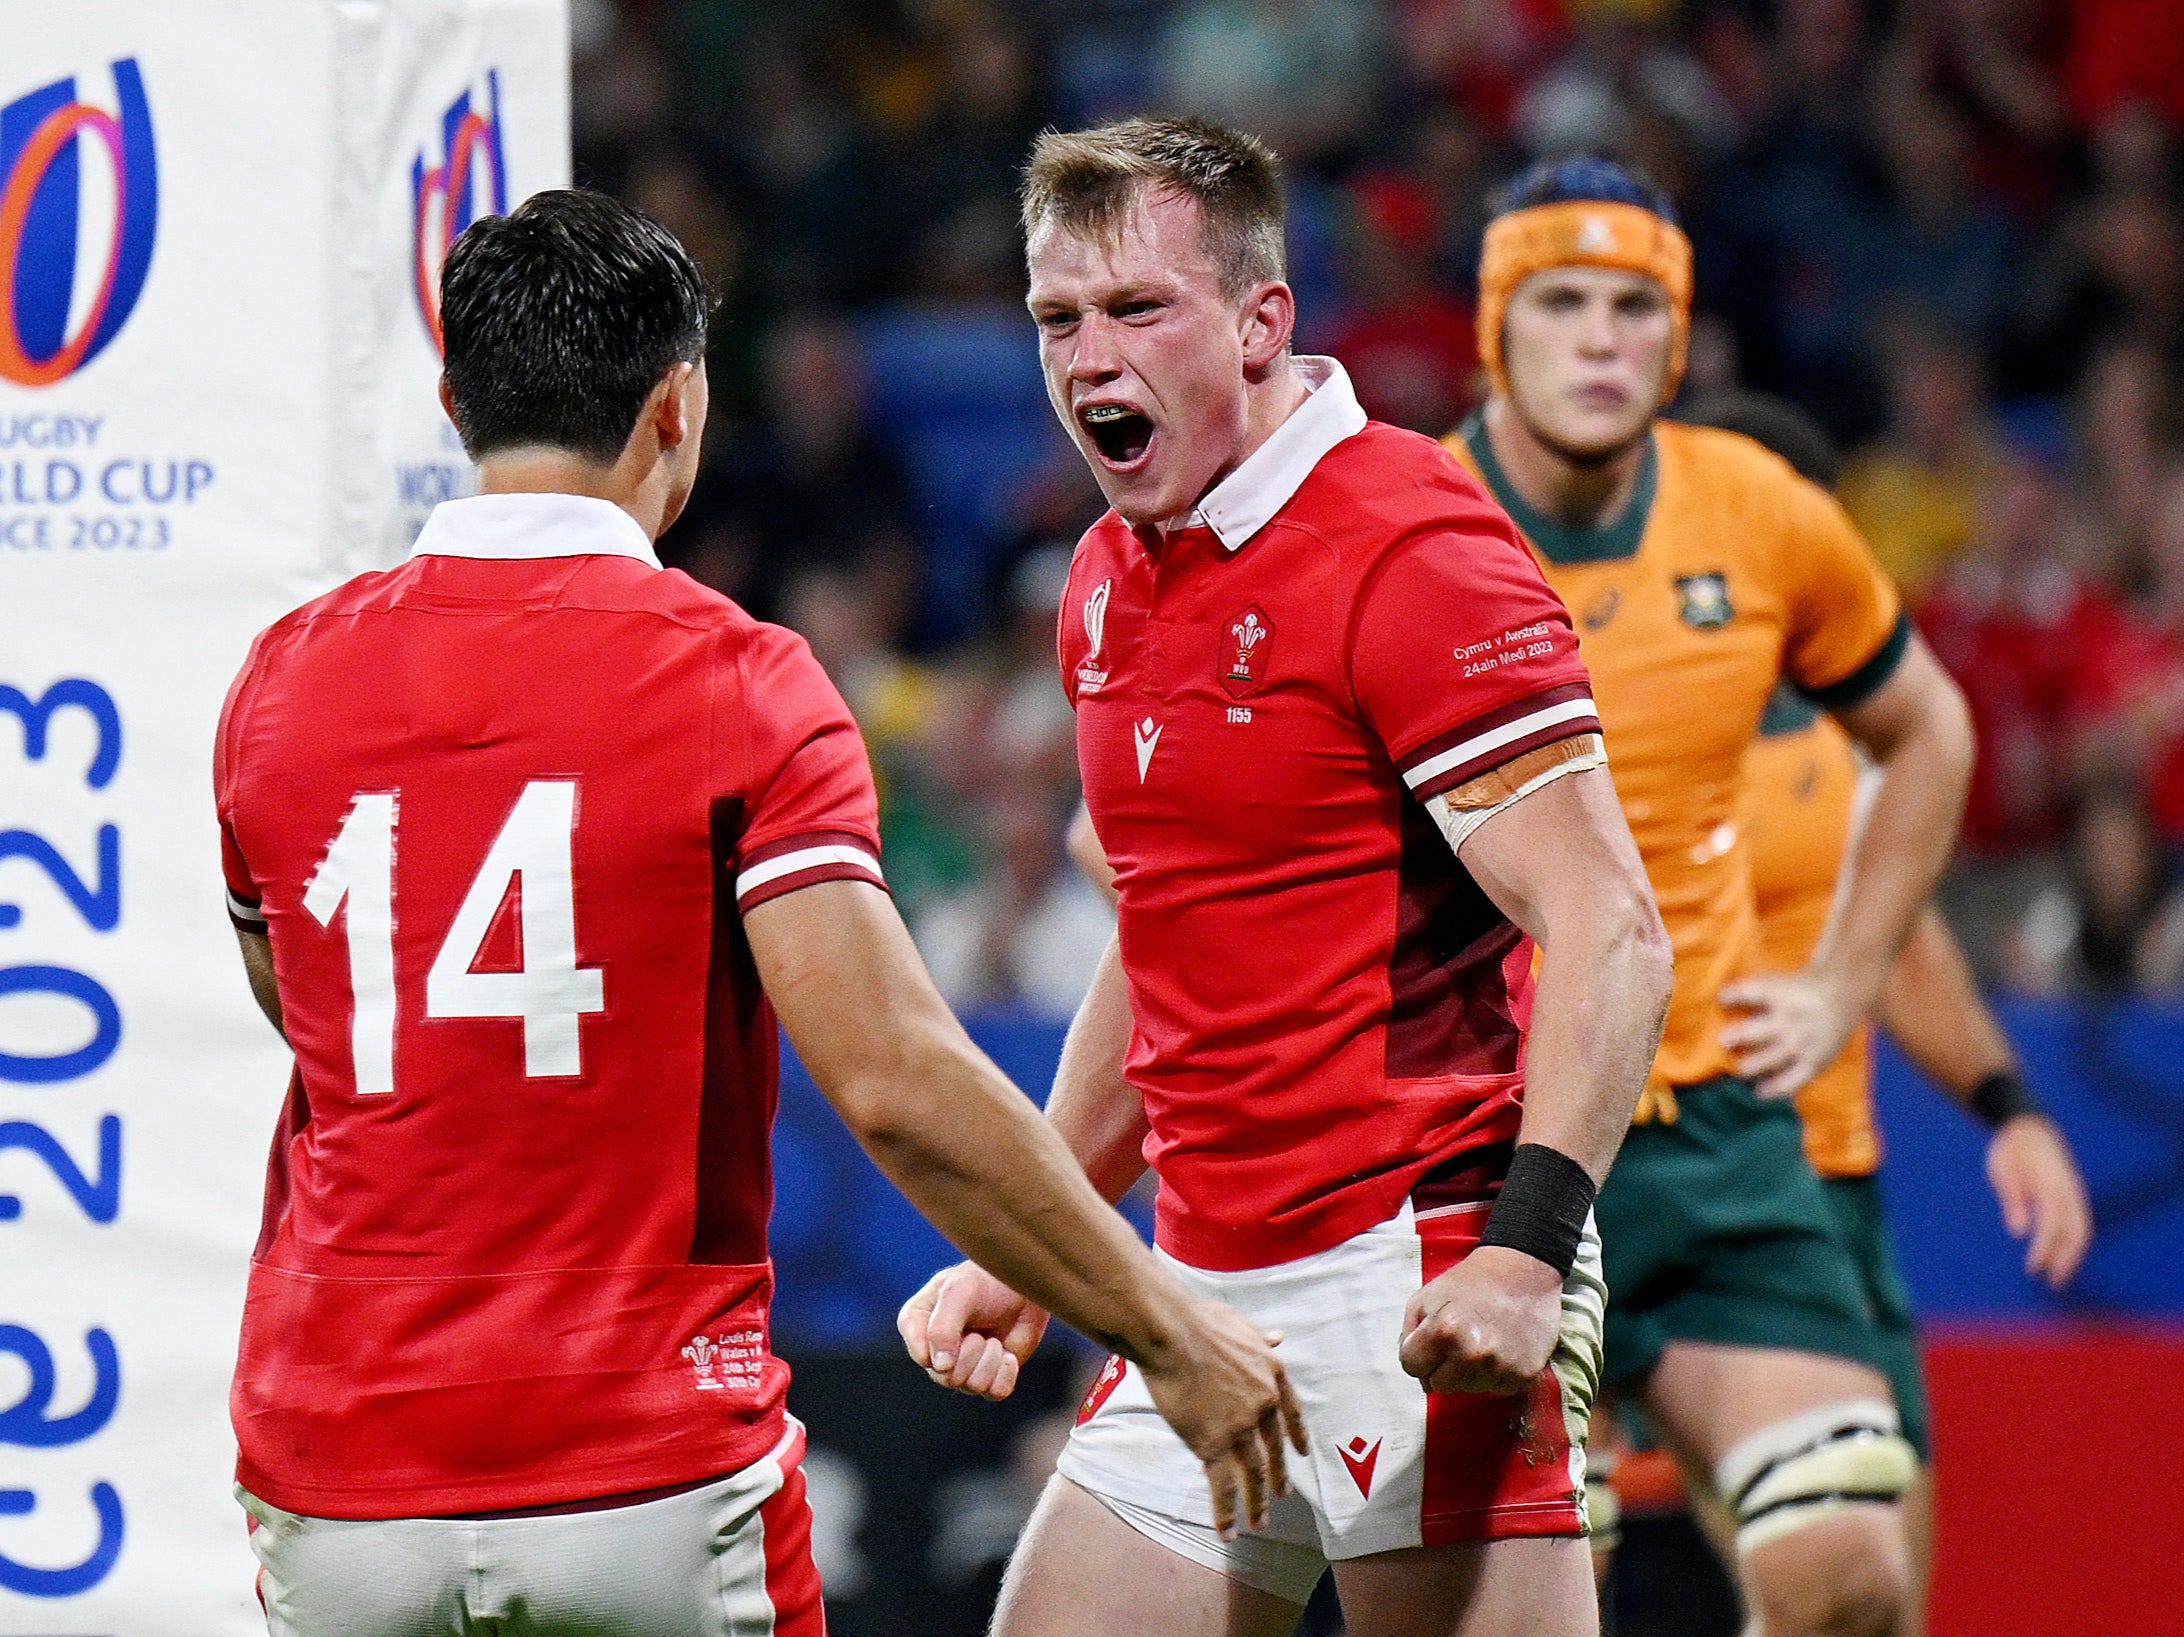 Wales celebrated a comprehensive win in Lyon